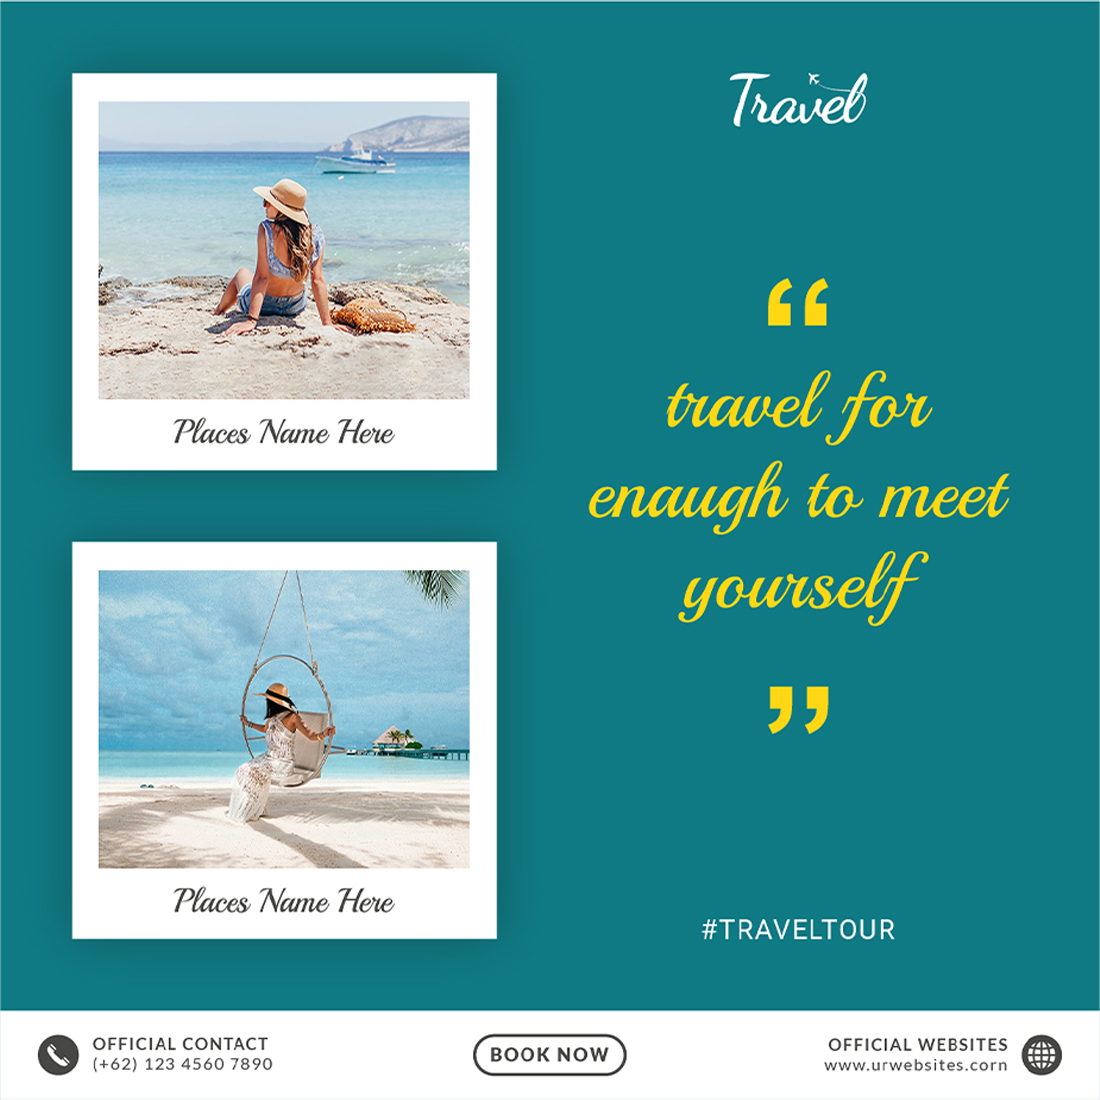 Leisure & Travel Social Media Post Templates for your projects.